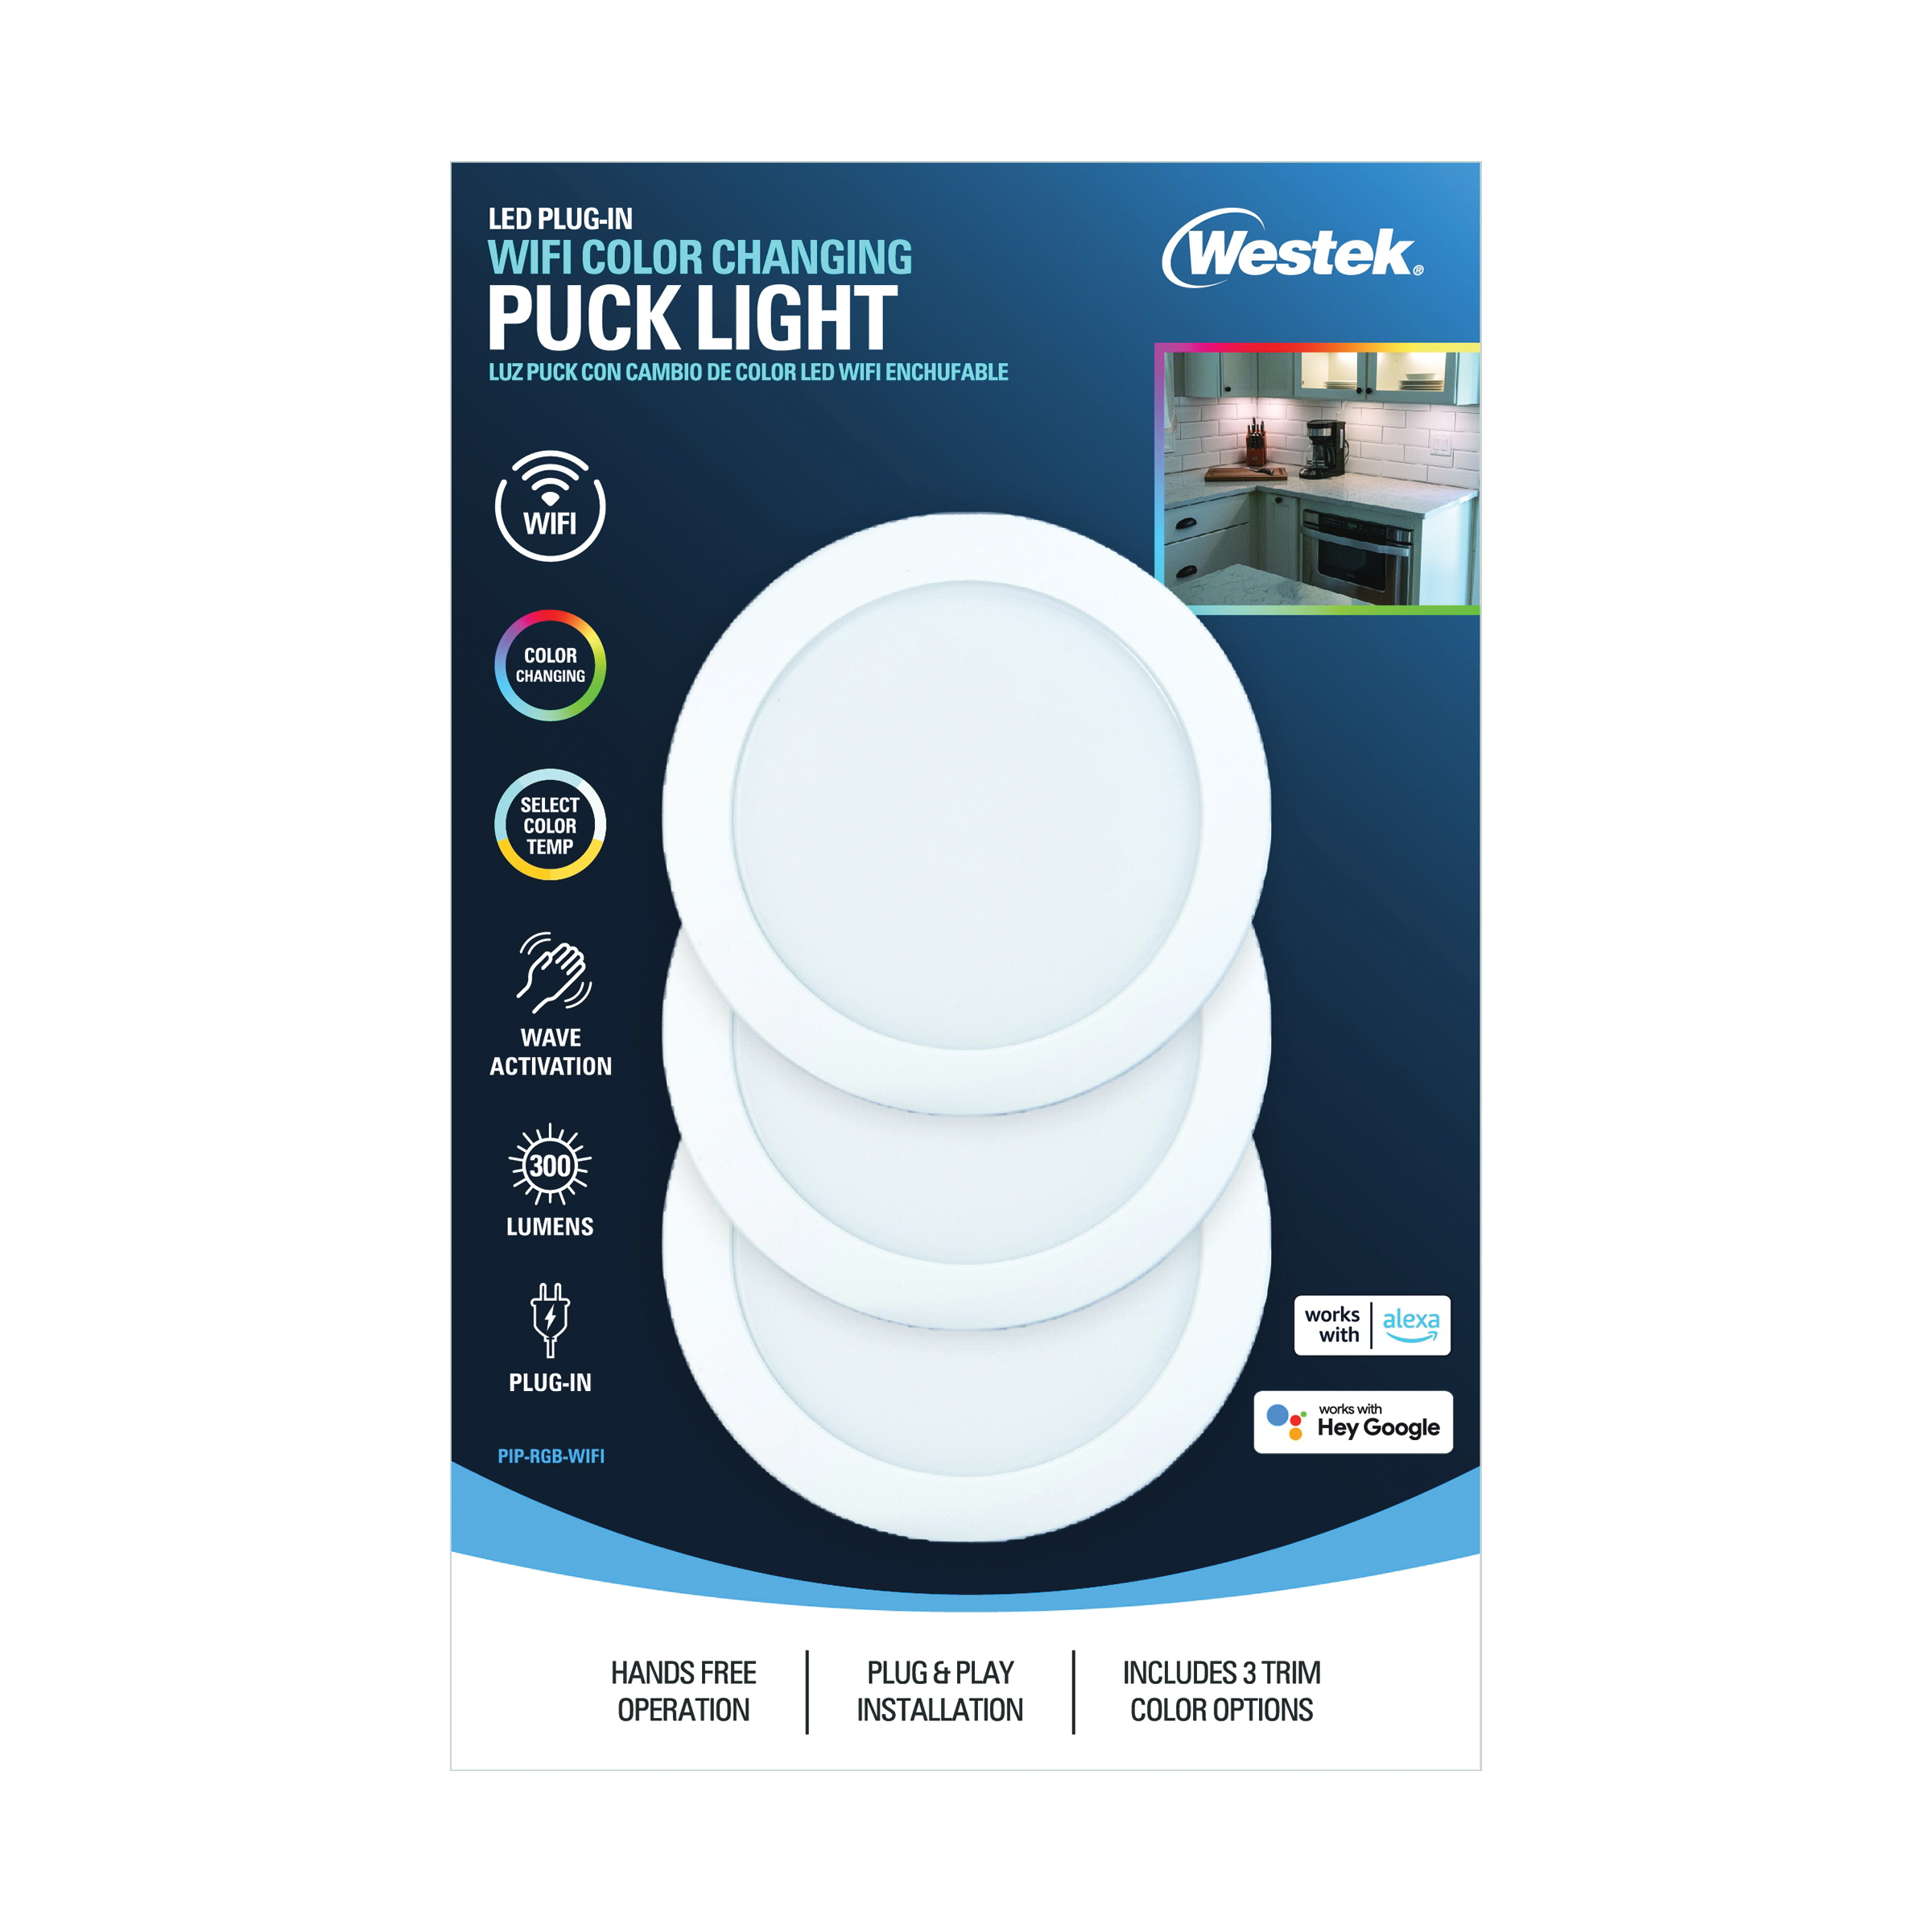 PIP-RGB-WIFI WiFi and Motion Controlled Puck Light, 120 V, 3.5 W, 3-Lamp, LED Lamp, 300 Lumens